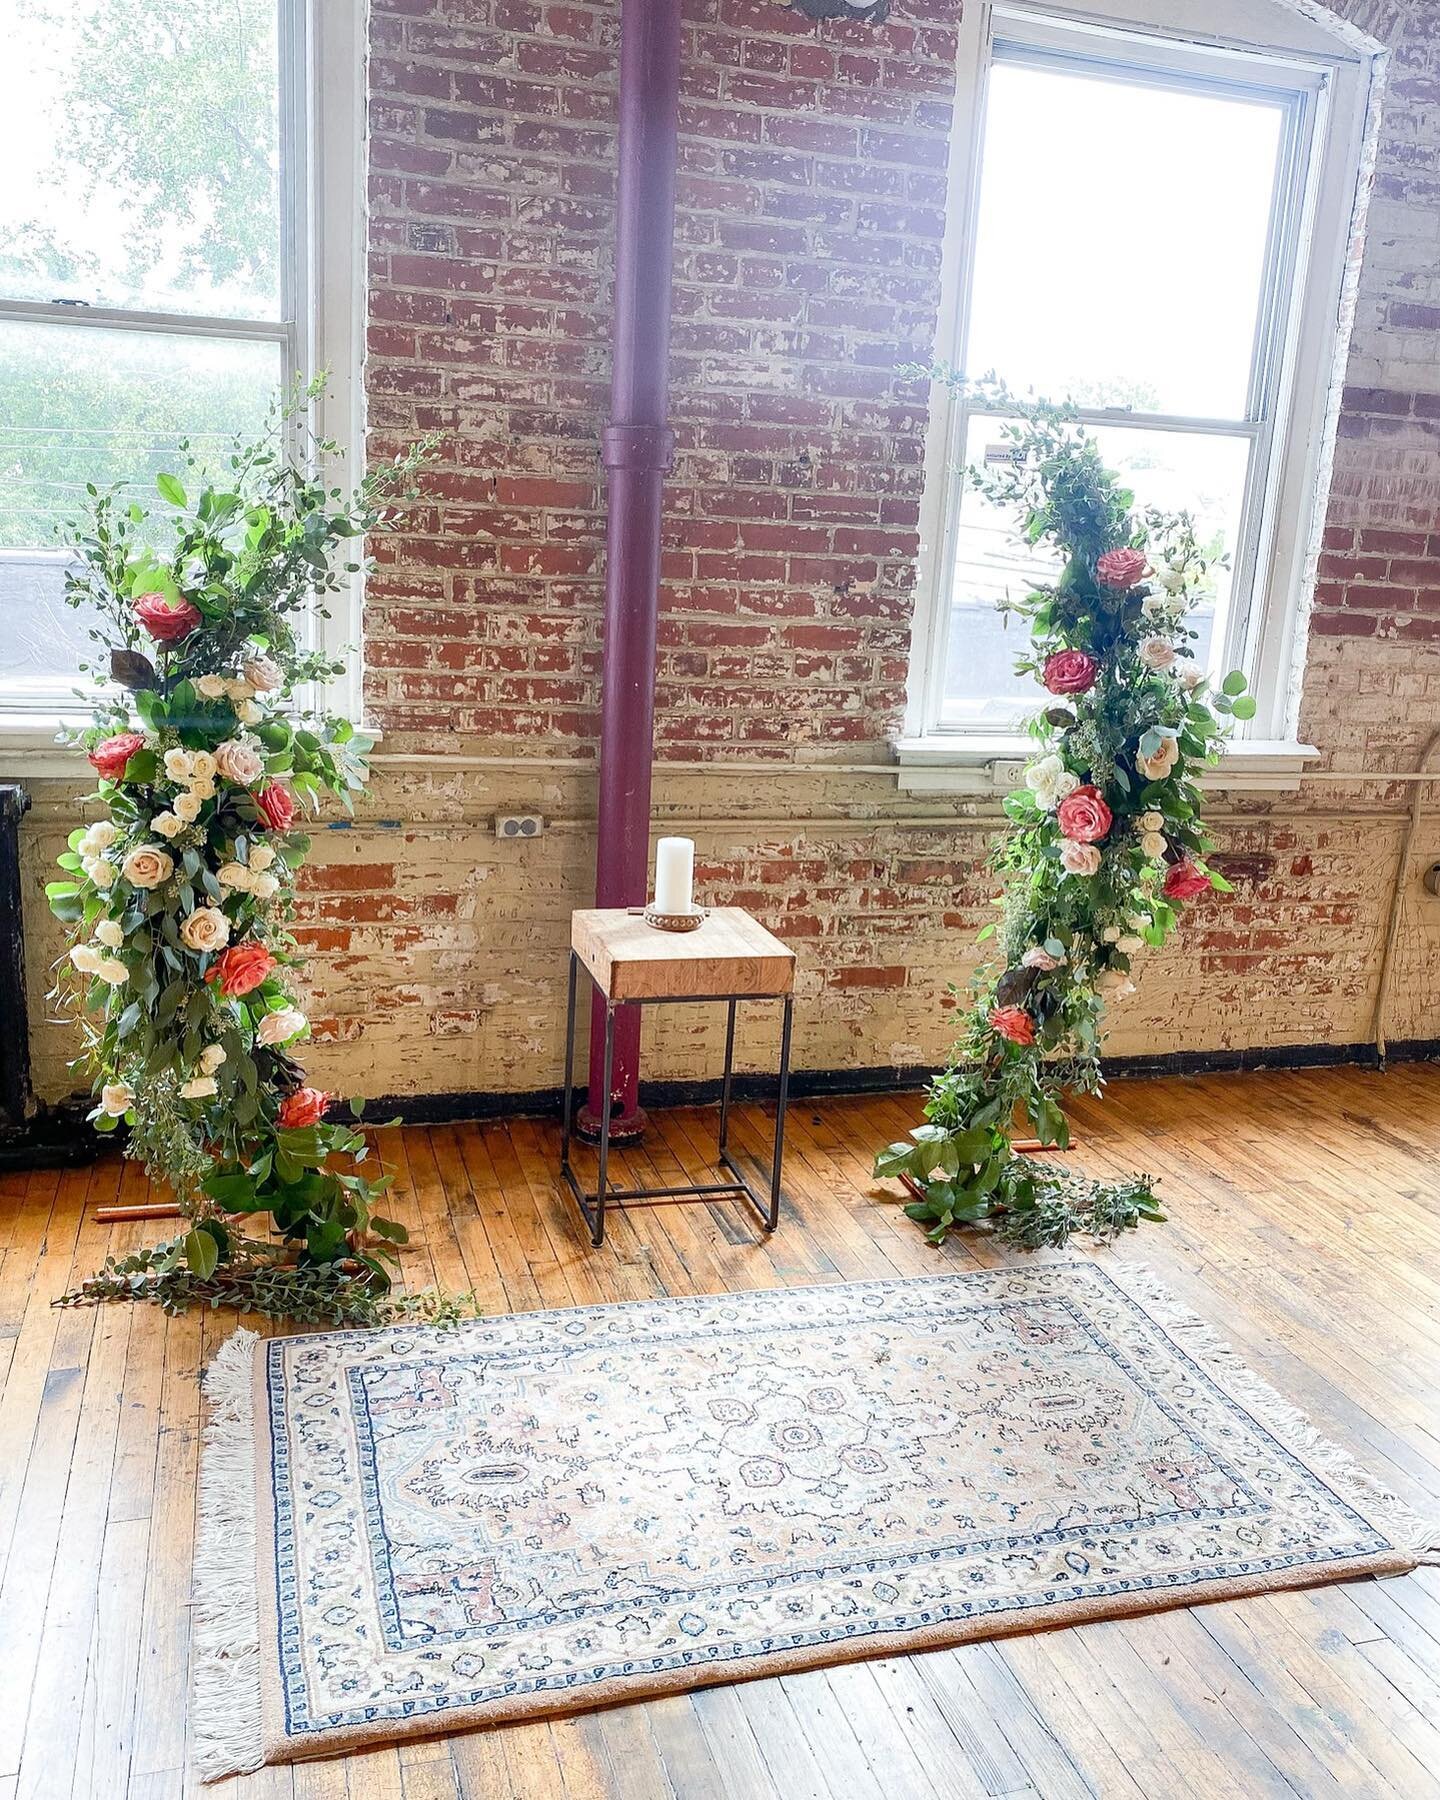 Can you picture it?
Your perfect wedding ceremony backdrop&hellip;

If it looks anything like soft sunlight with exposed brick and a little artsy thrown in, look no further than @hedge_gallery ! HEDGE Gallery is a beautiful spot for seating anywhere 